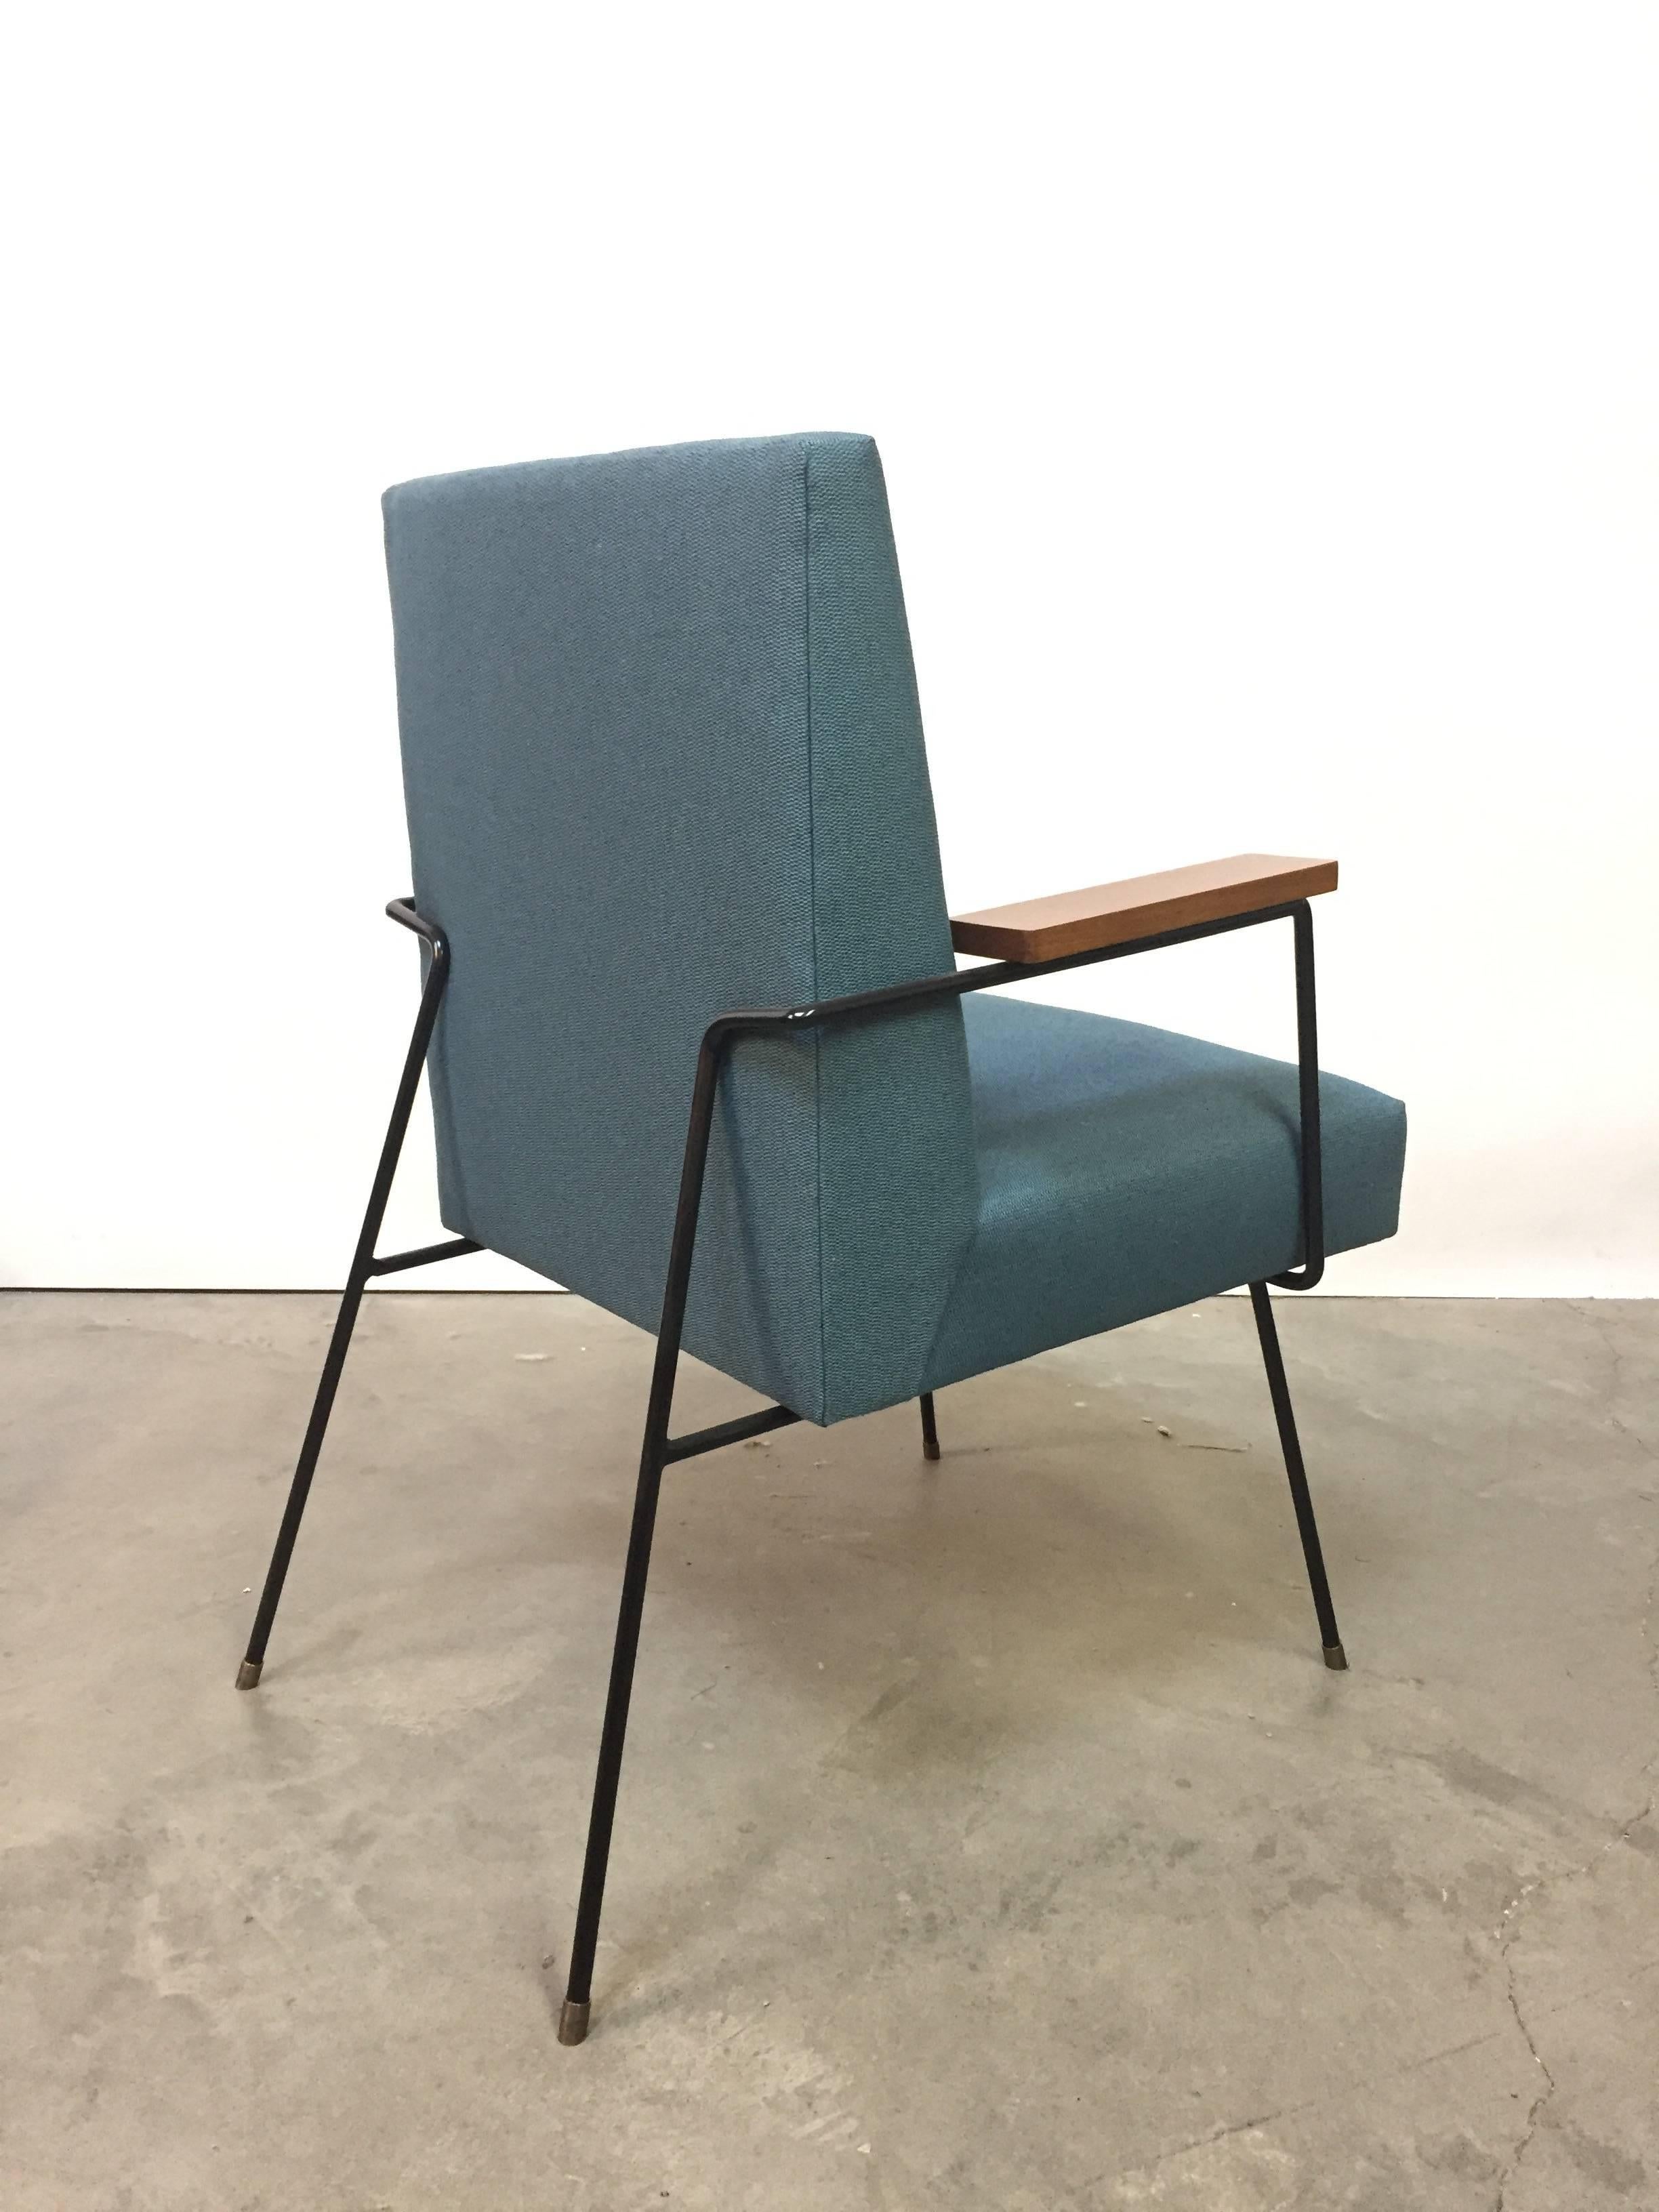 California Modern Iron Armchair In Excellent Condition For Sale In Berkeley, CA